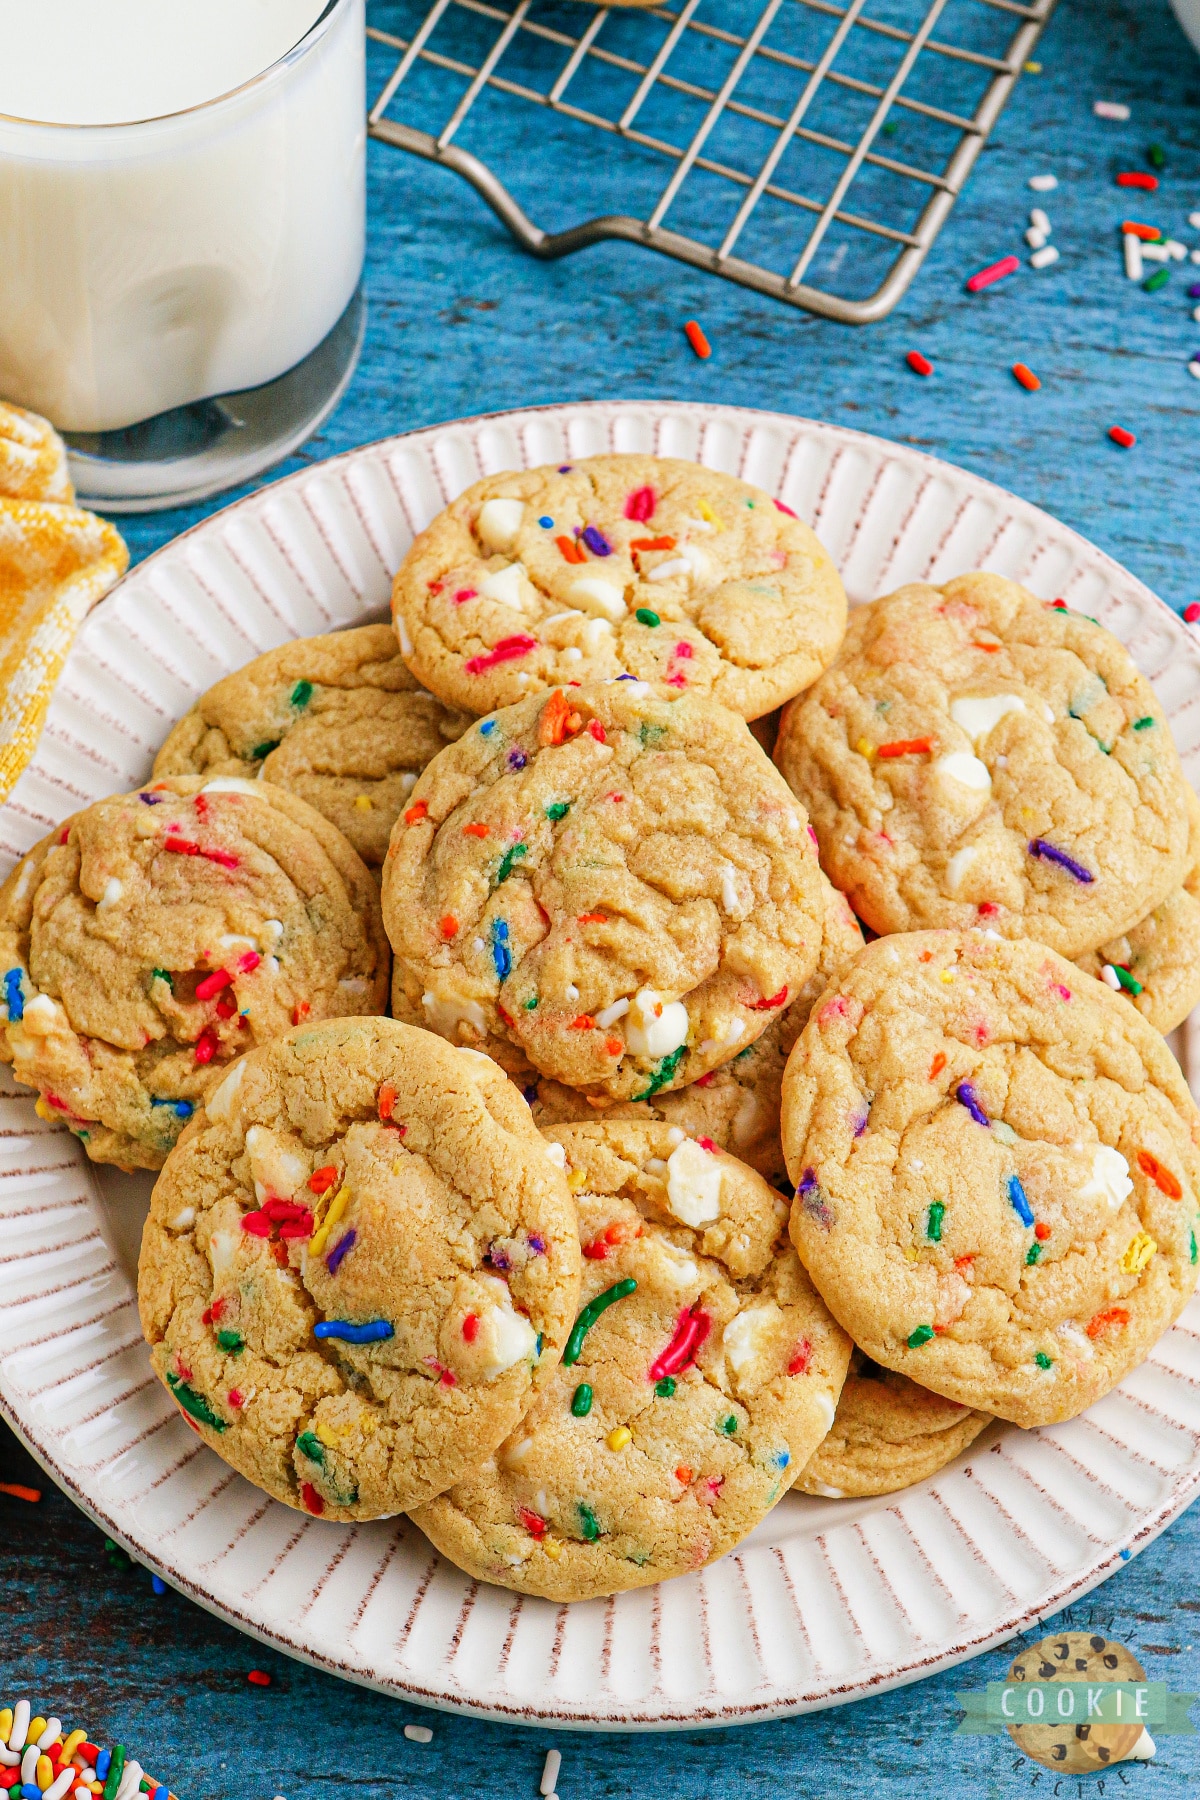 Funfetti Cookies are made with vanilla pudding, white chocolate chips and sprinkles. Delicious funfetti cookie recipe that tastes just like birthday cake!